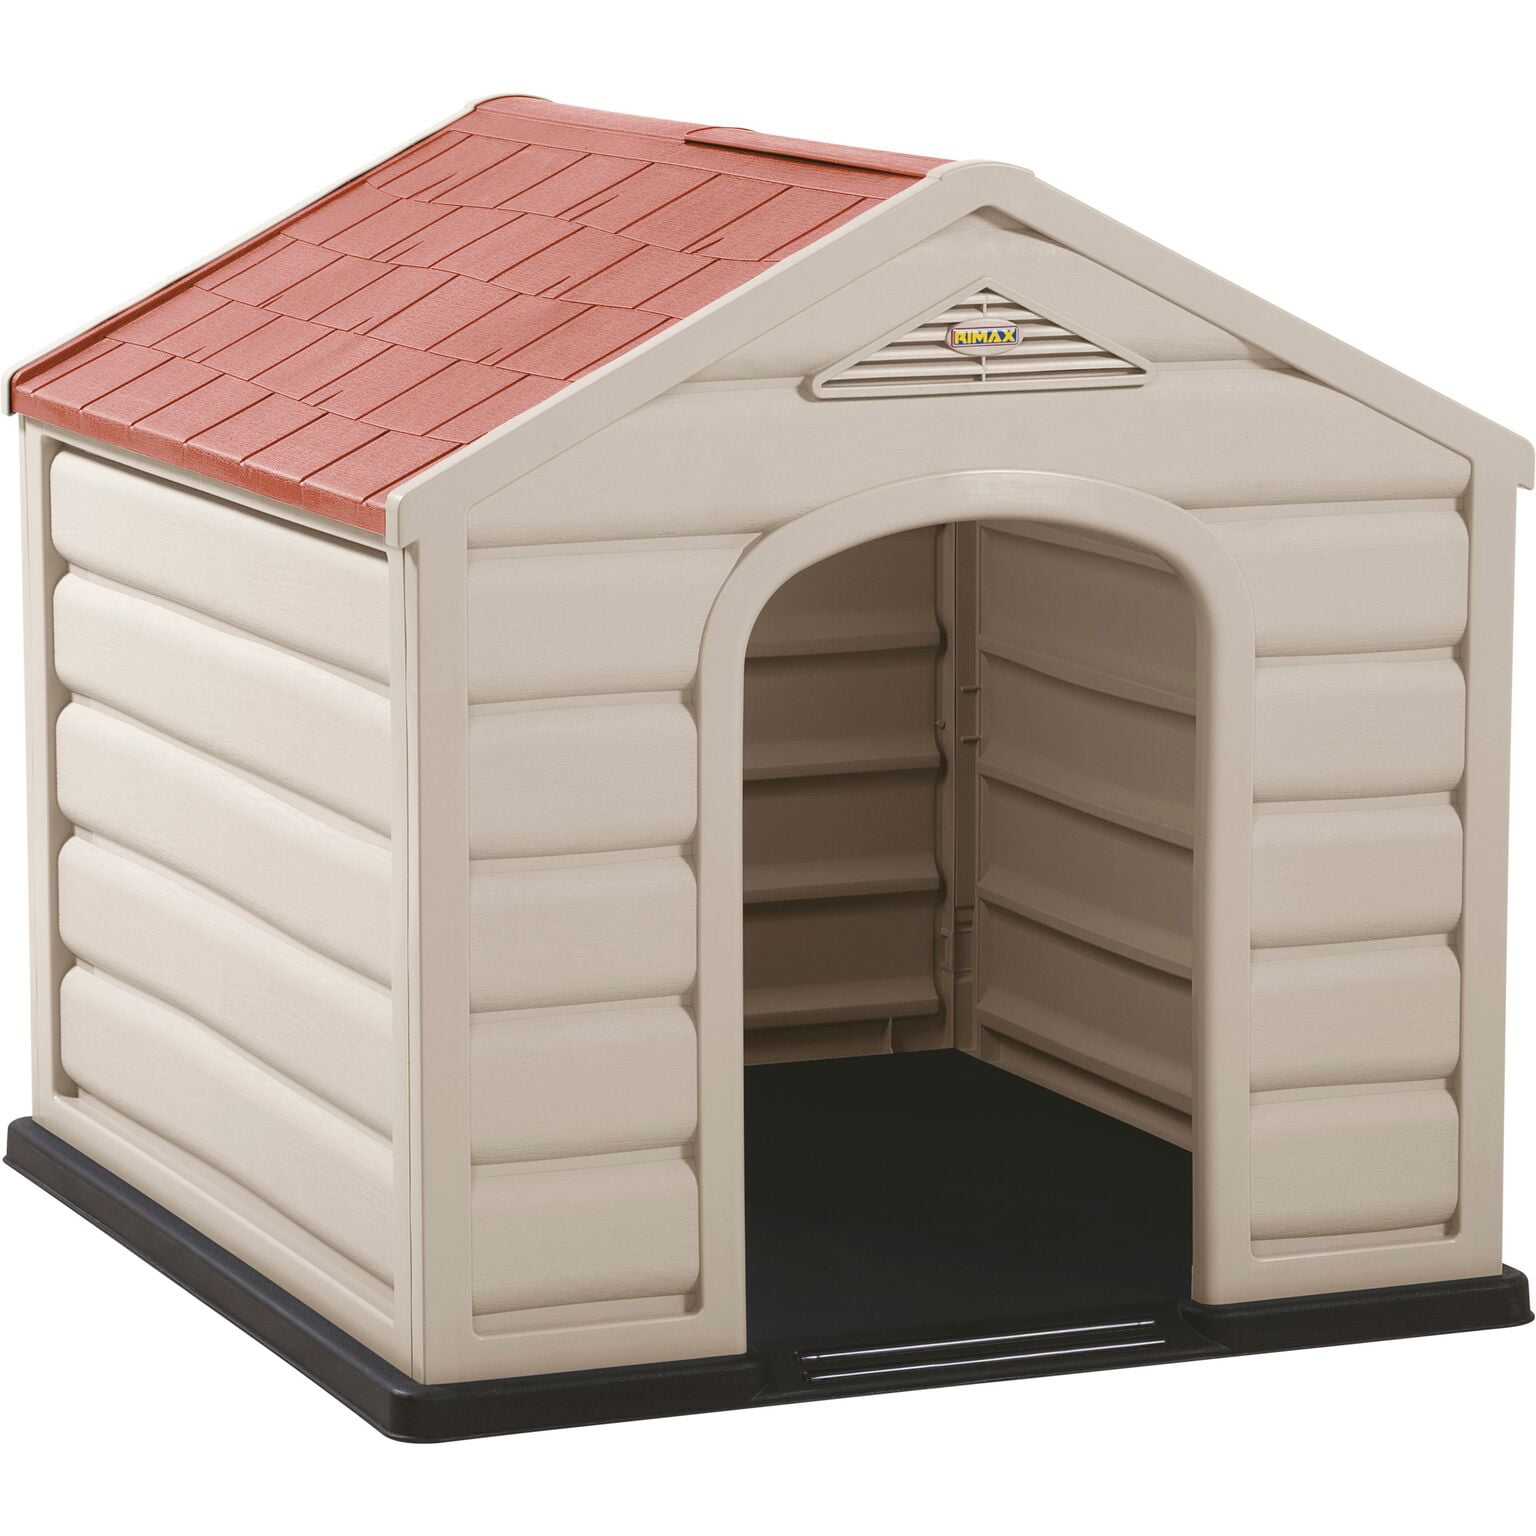 outside dog houses for large dogs